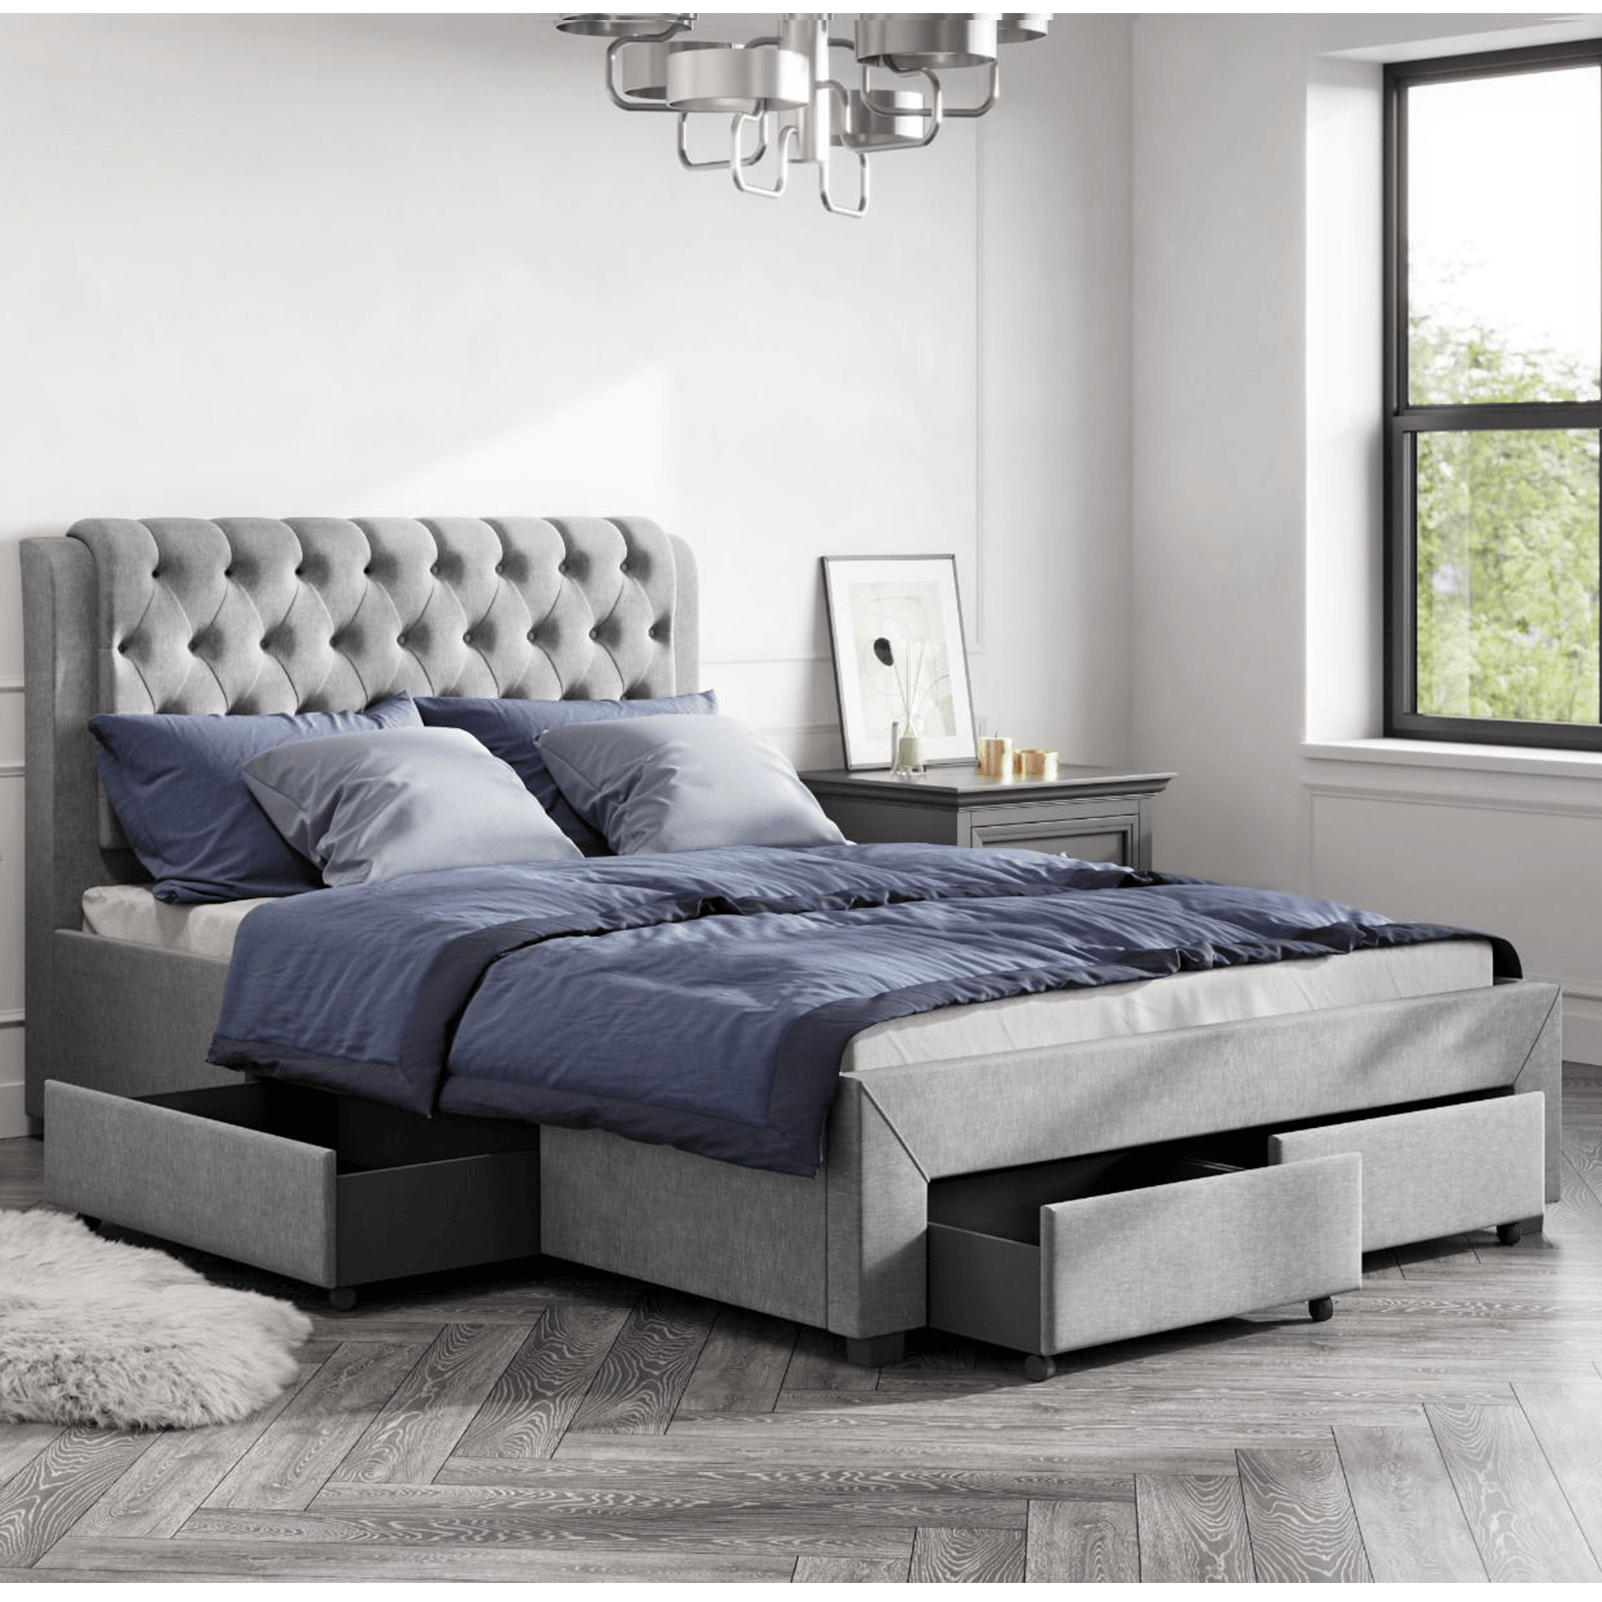 Four Draw Double Bed Frame Light Grey 4 6